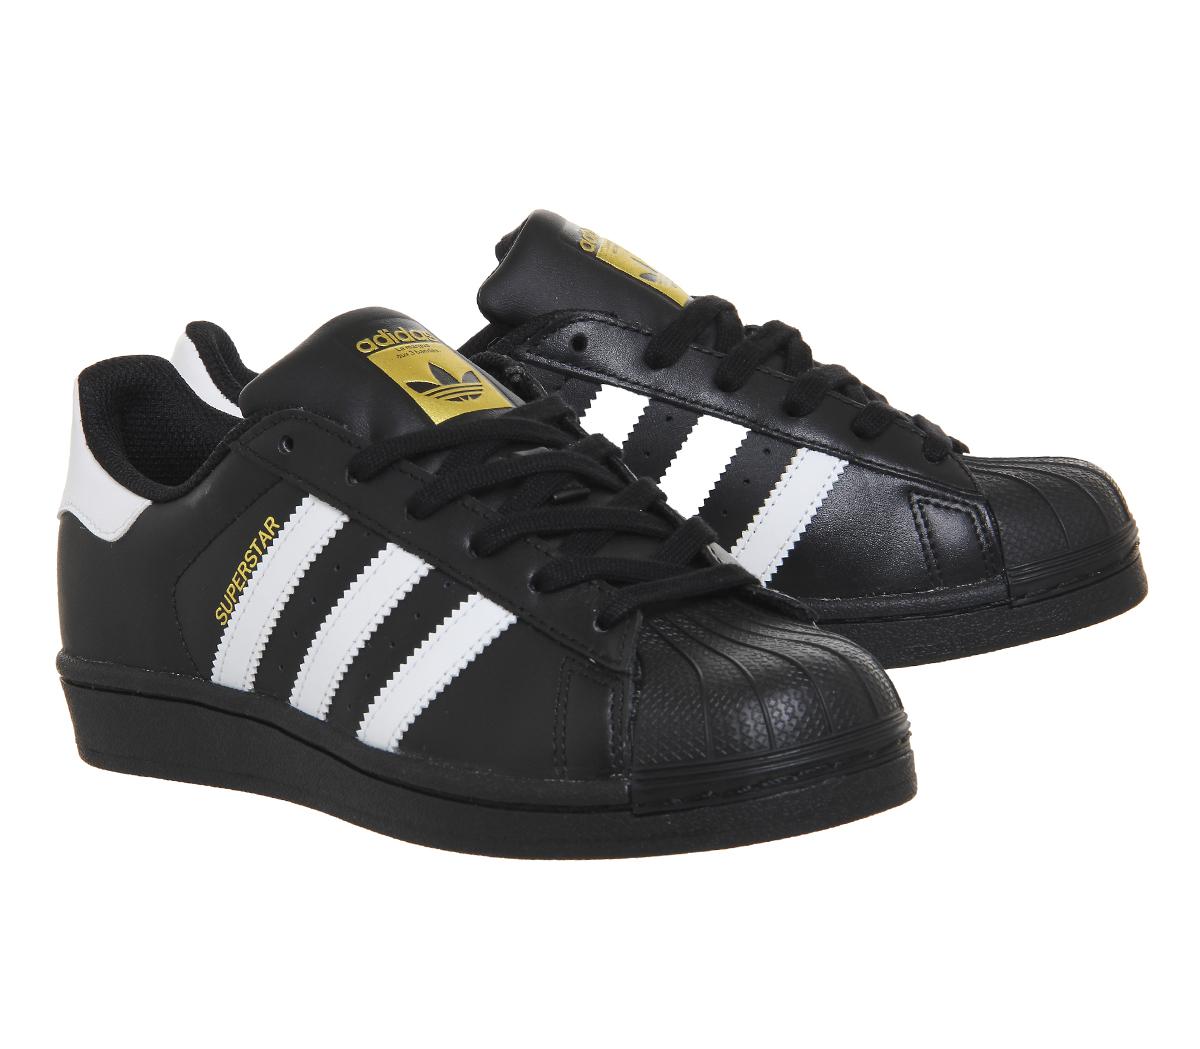 adidas Superstar 1 Black White Foundation - His trainers